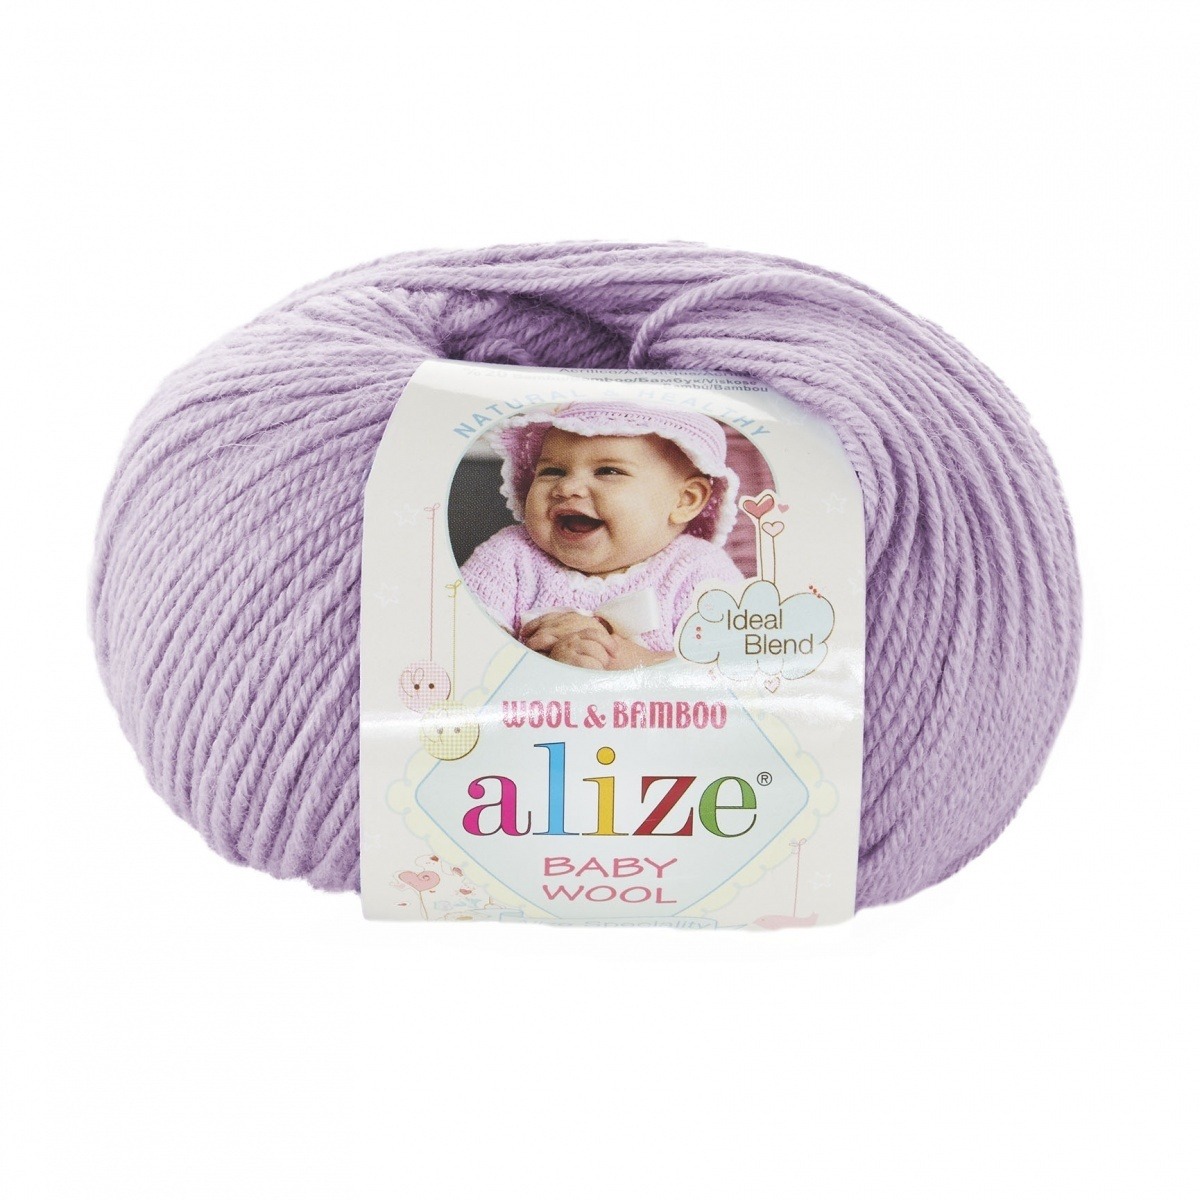 Alize "Baby wool" (146)